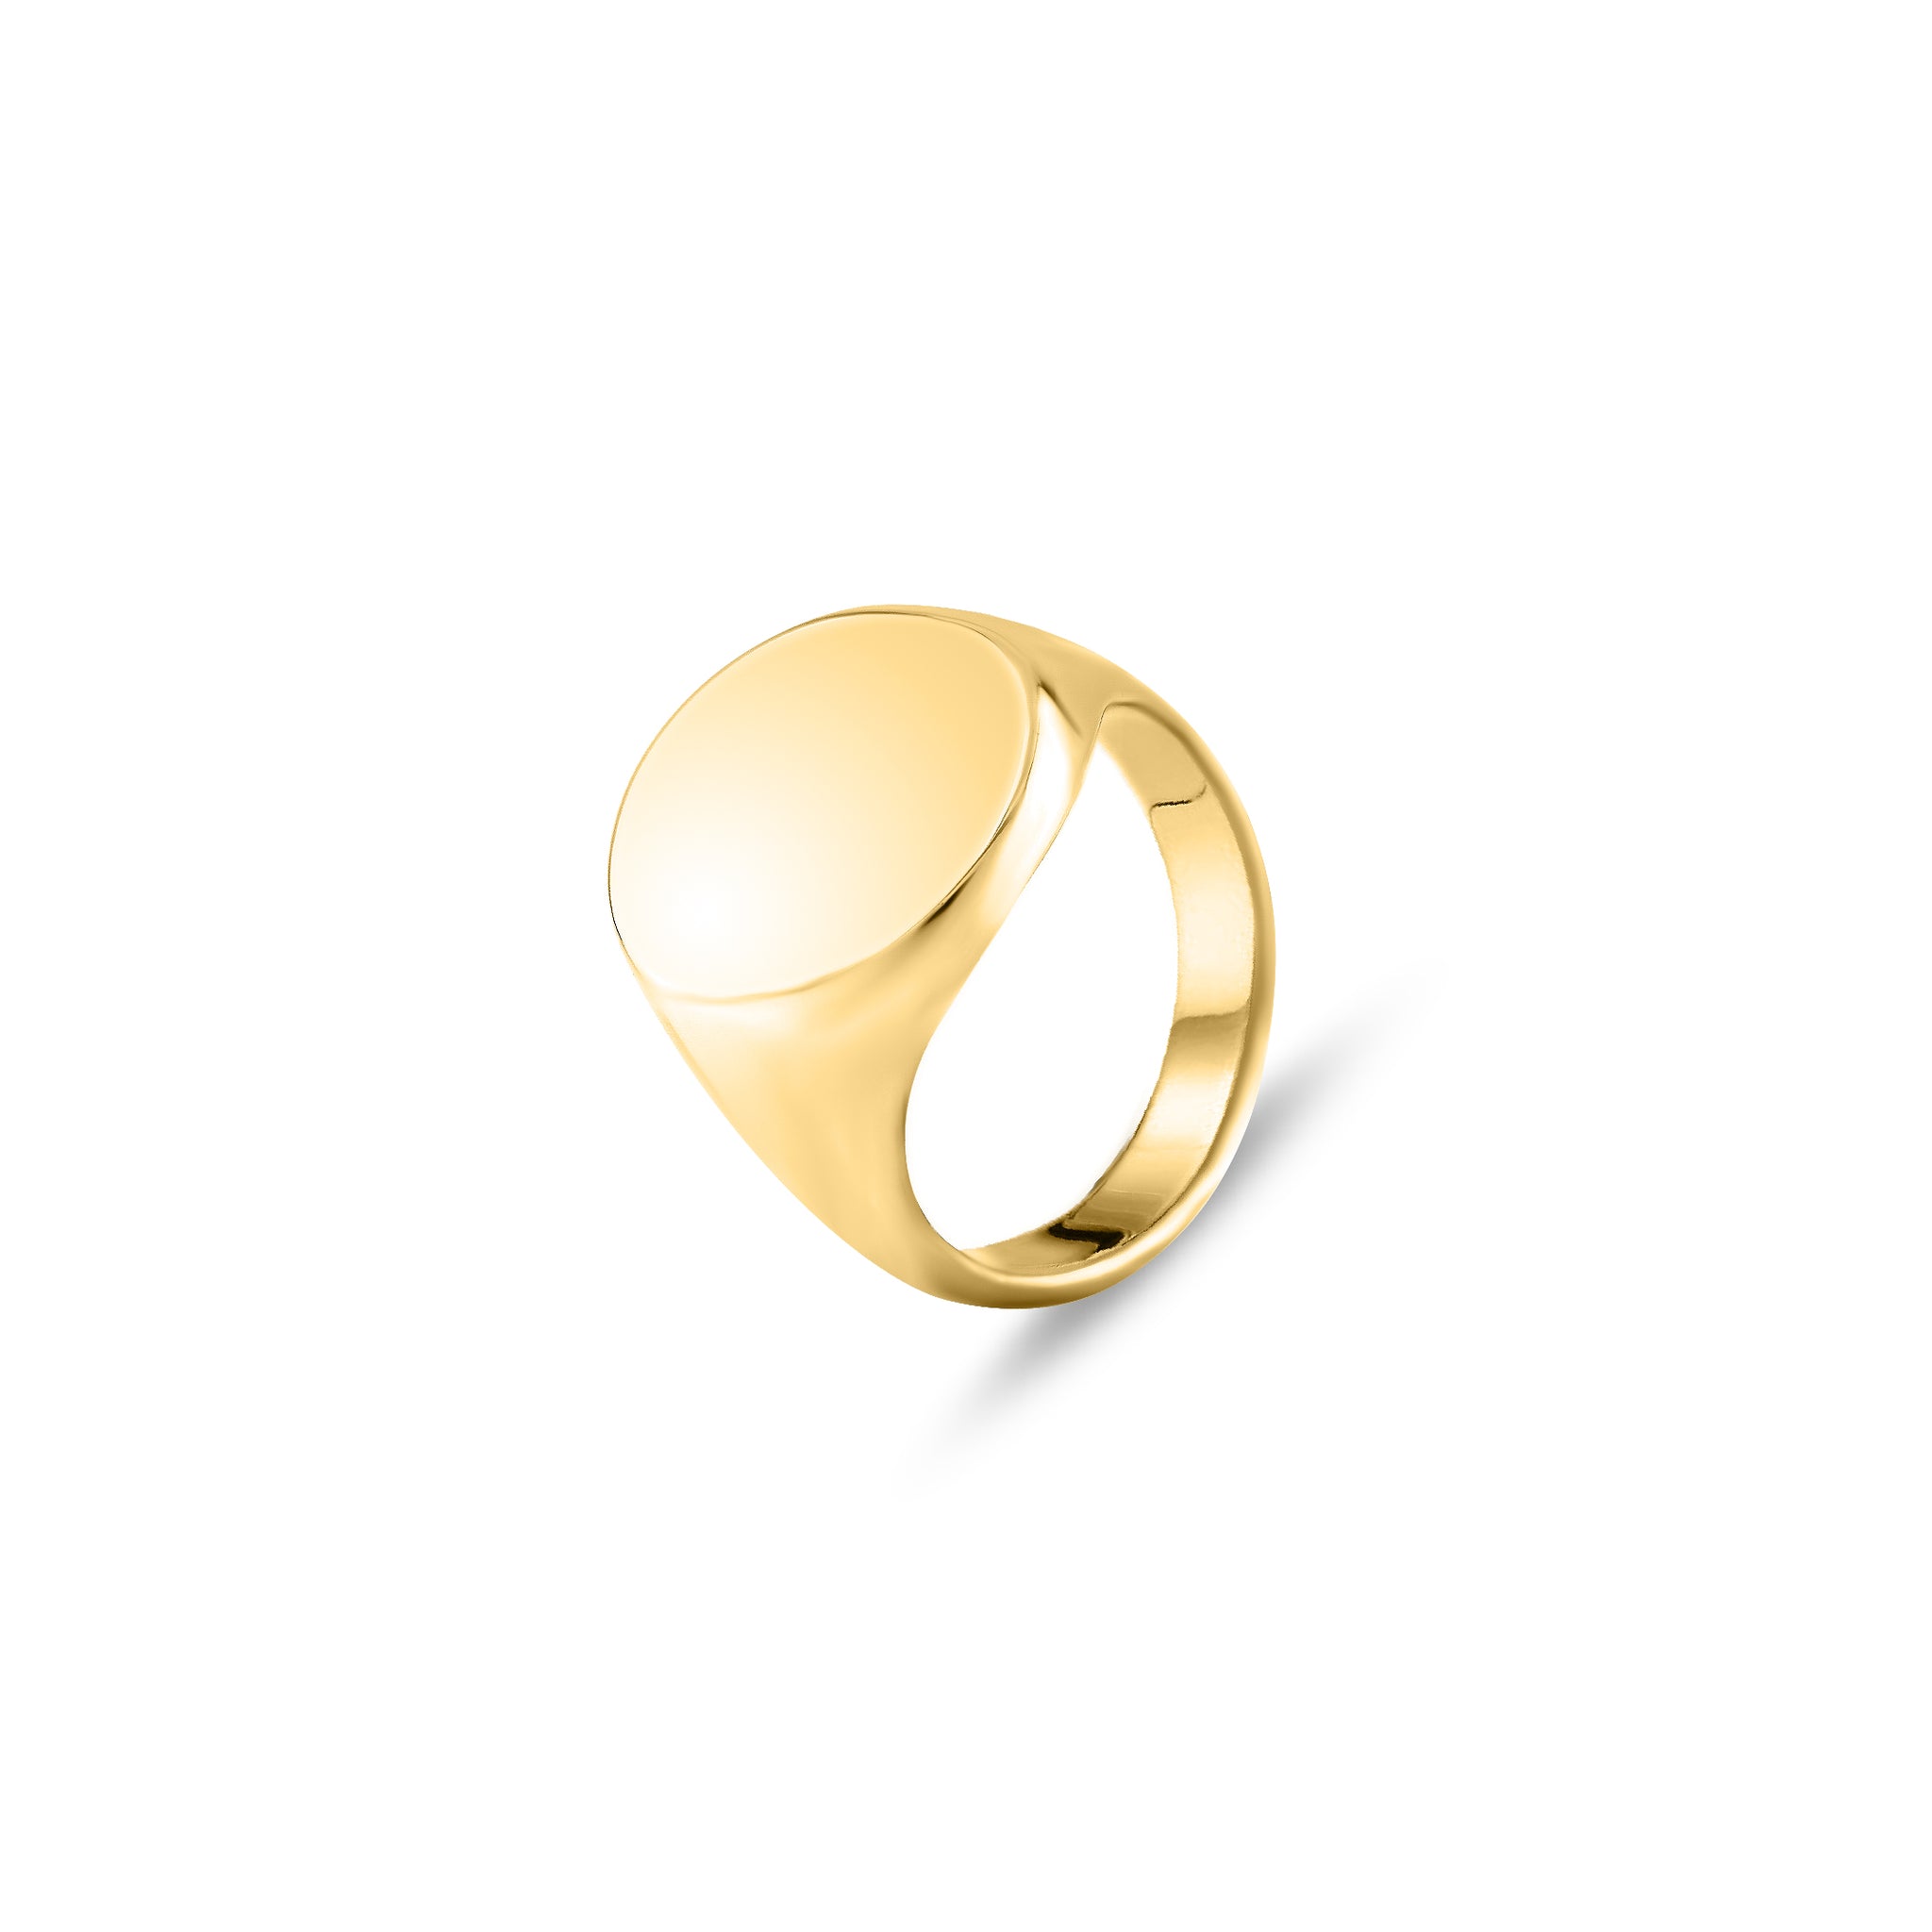 18ct Yellow Gold 20 x 16mm Oval Signet Ring